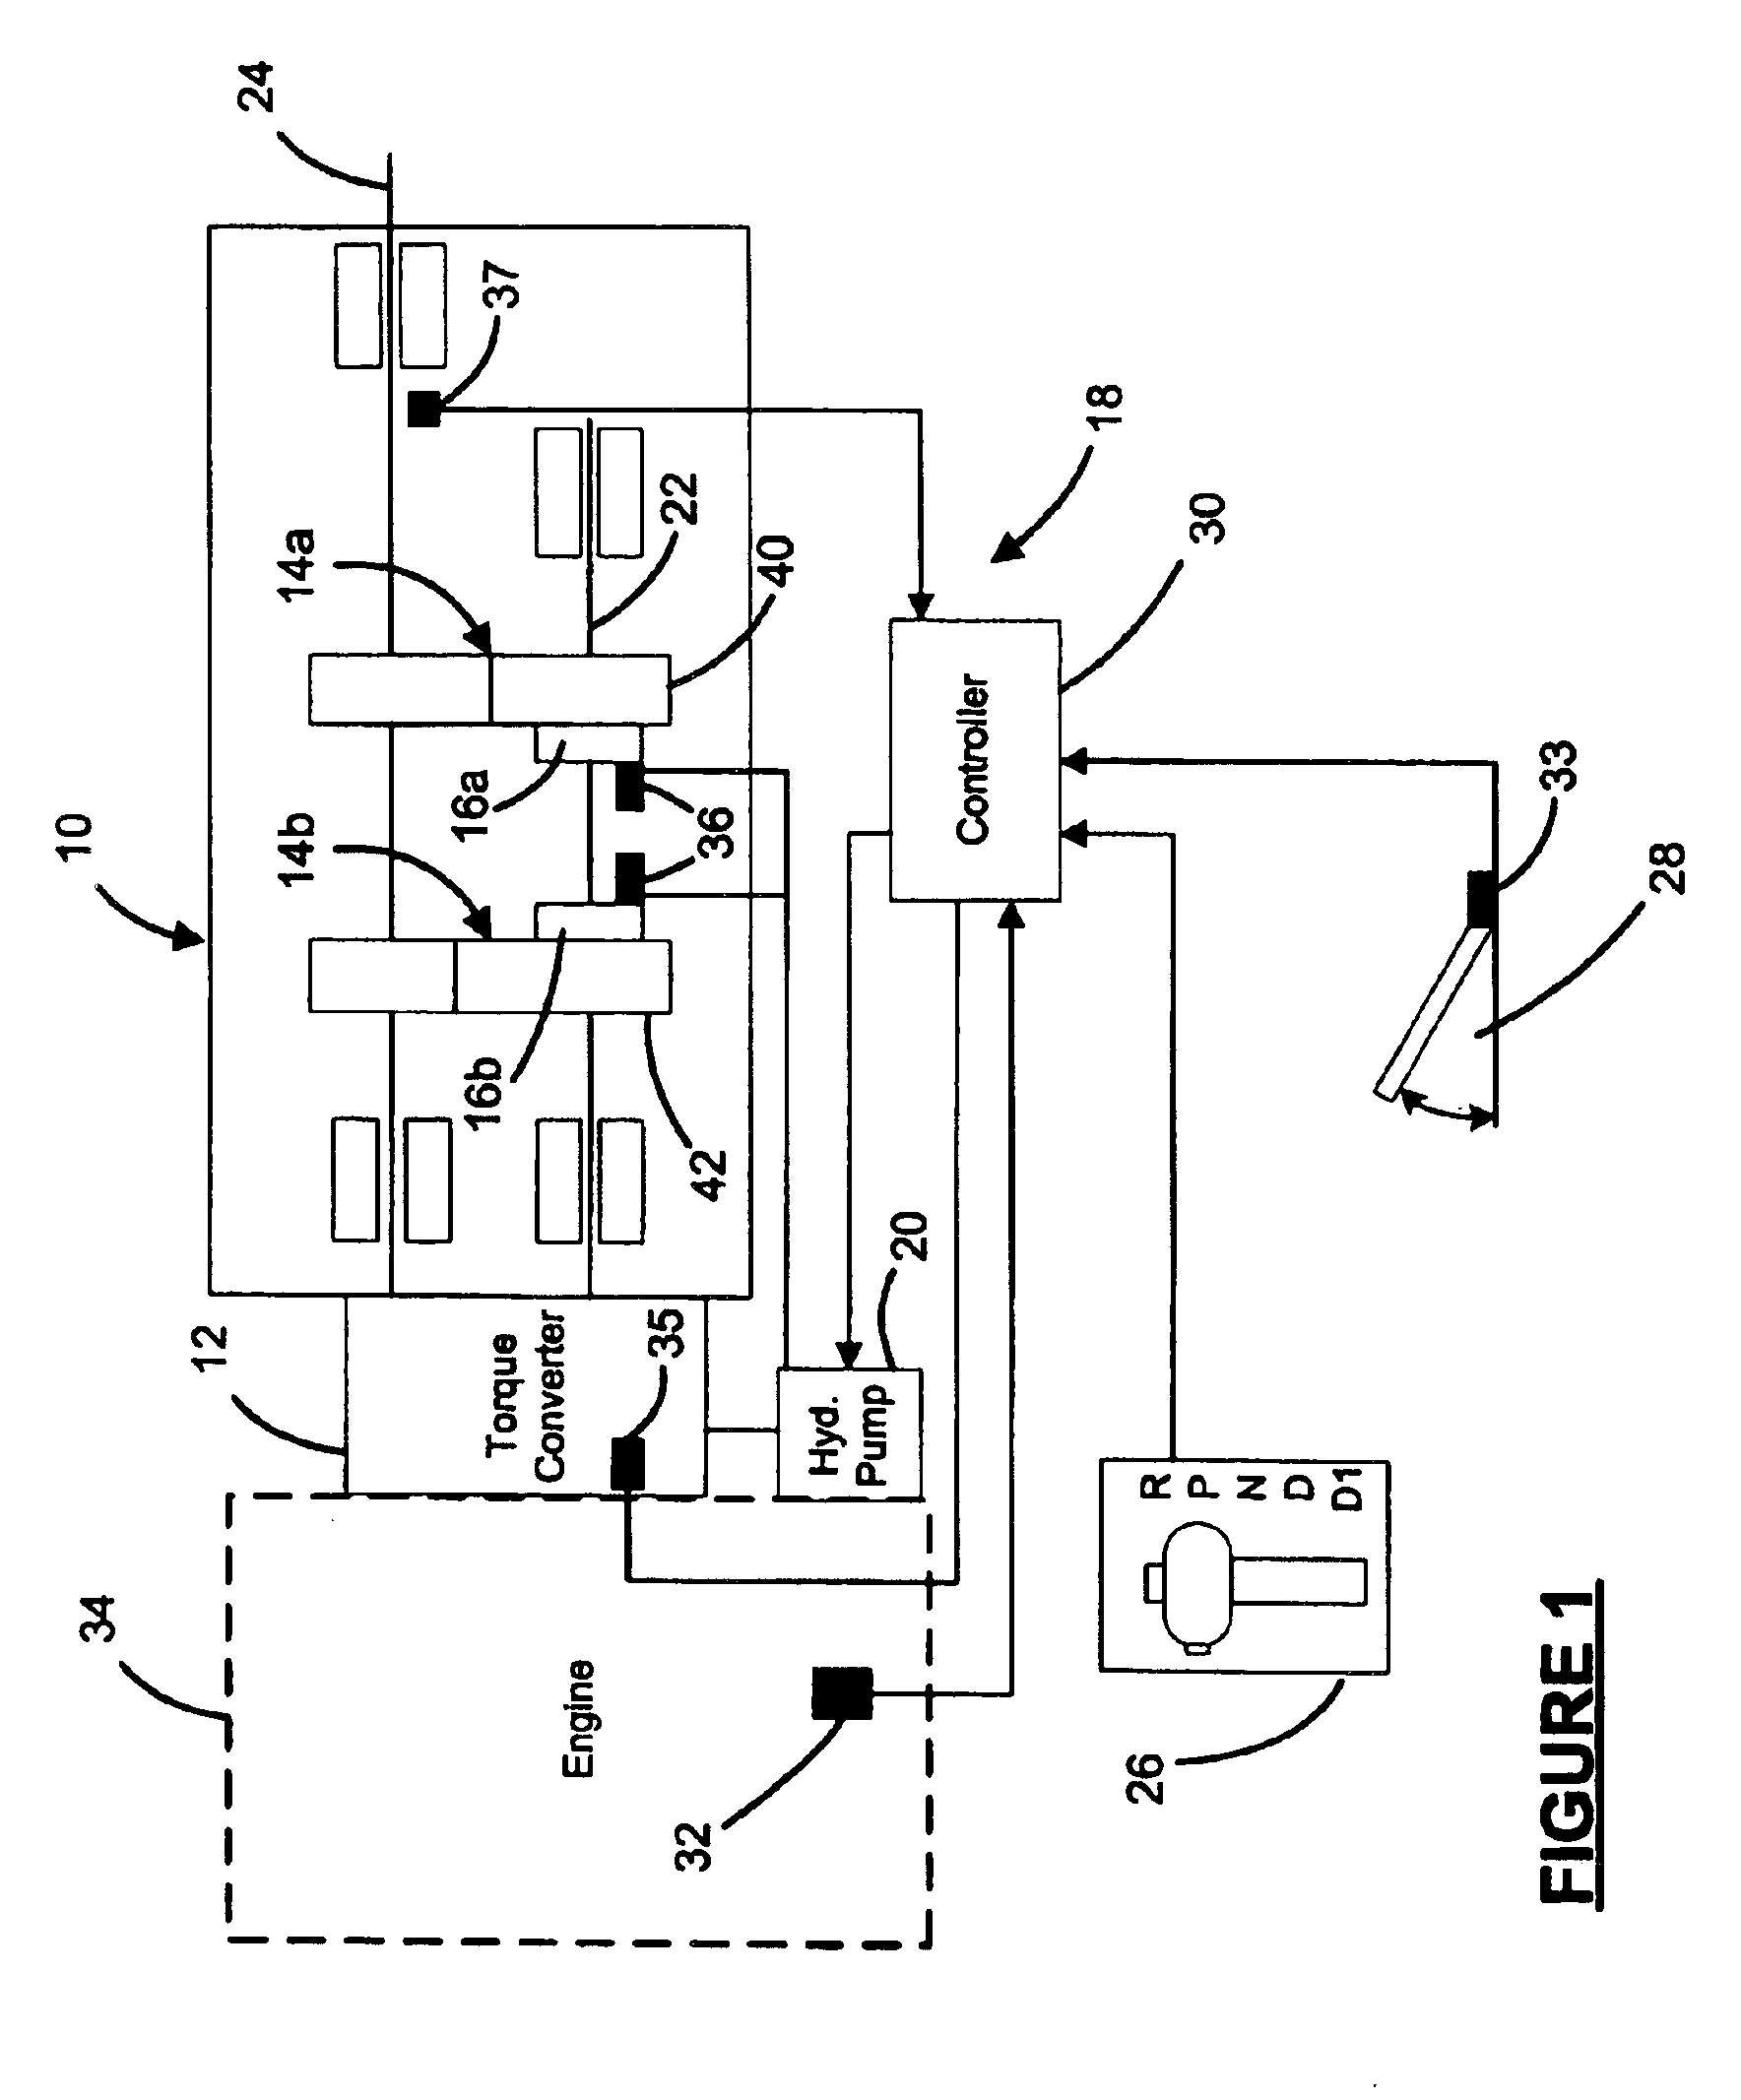 Electronic clutch-to-clutch transmission control system